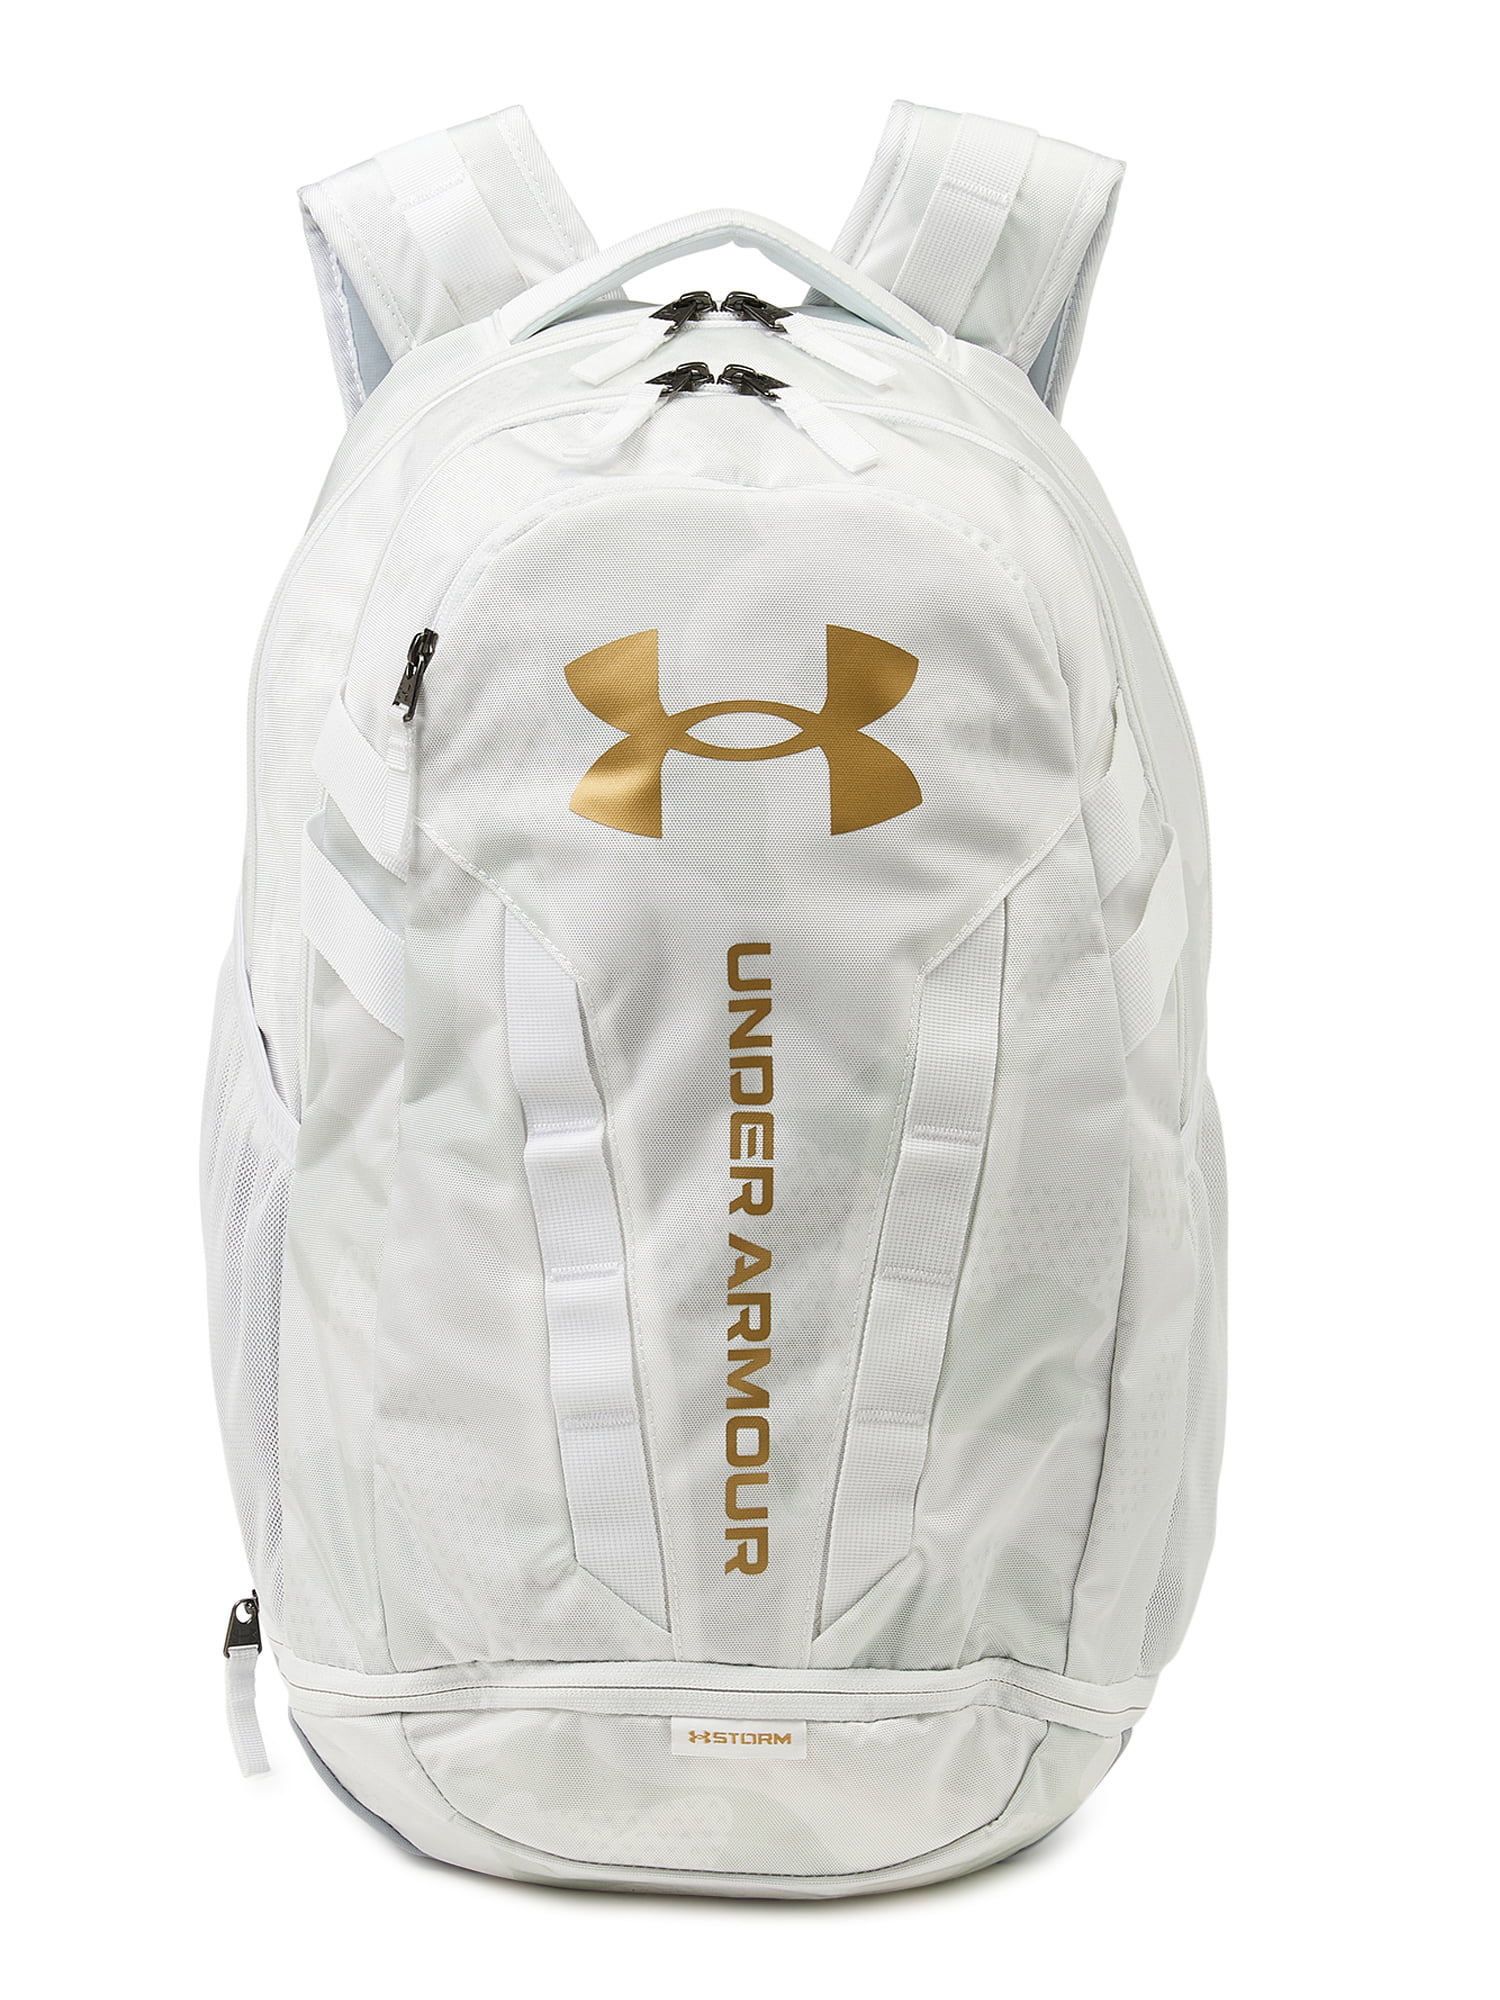 Under Armour unisex-adult Color Reveal Sackpack